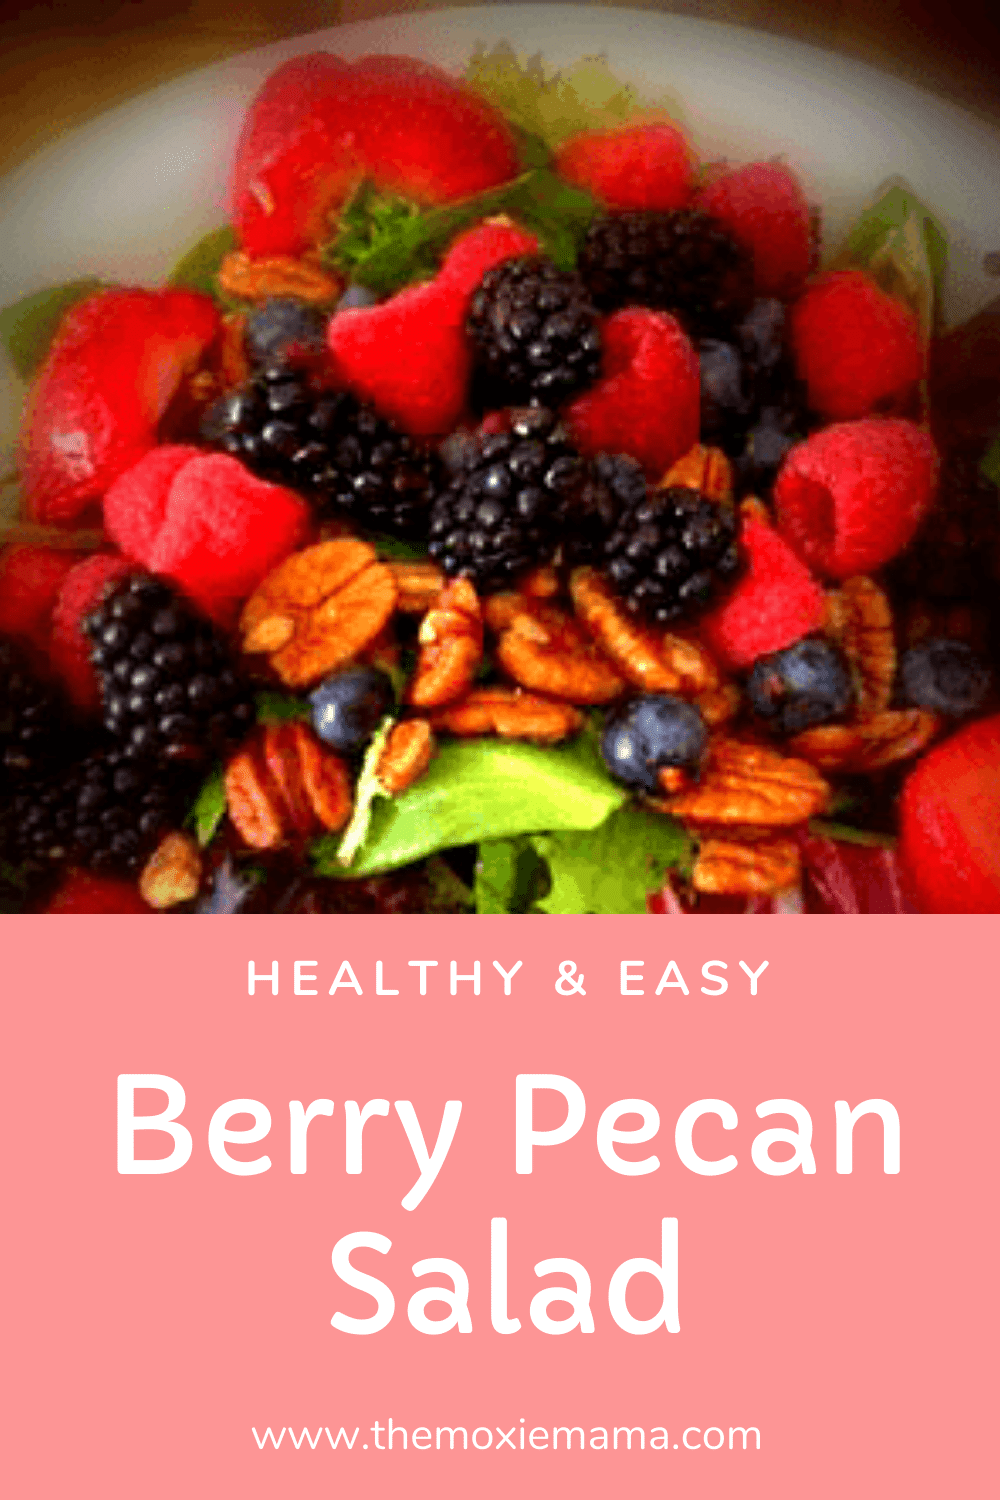 Healthy and easy berry pecan salad